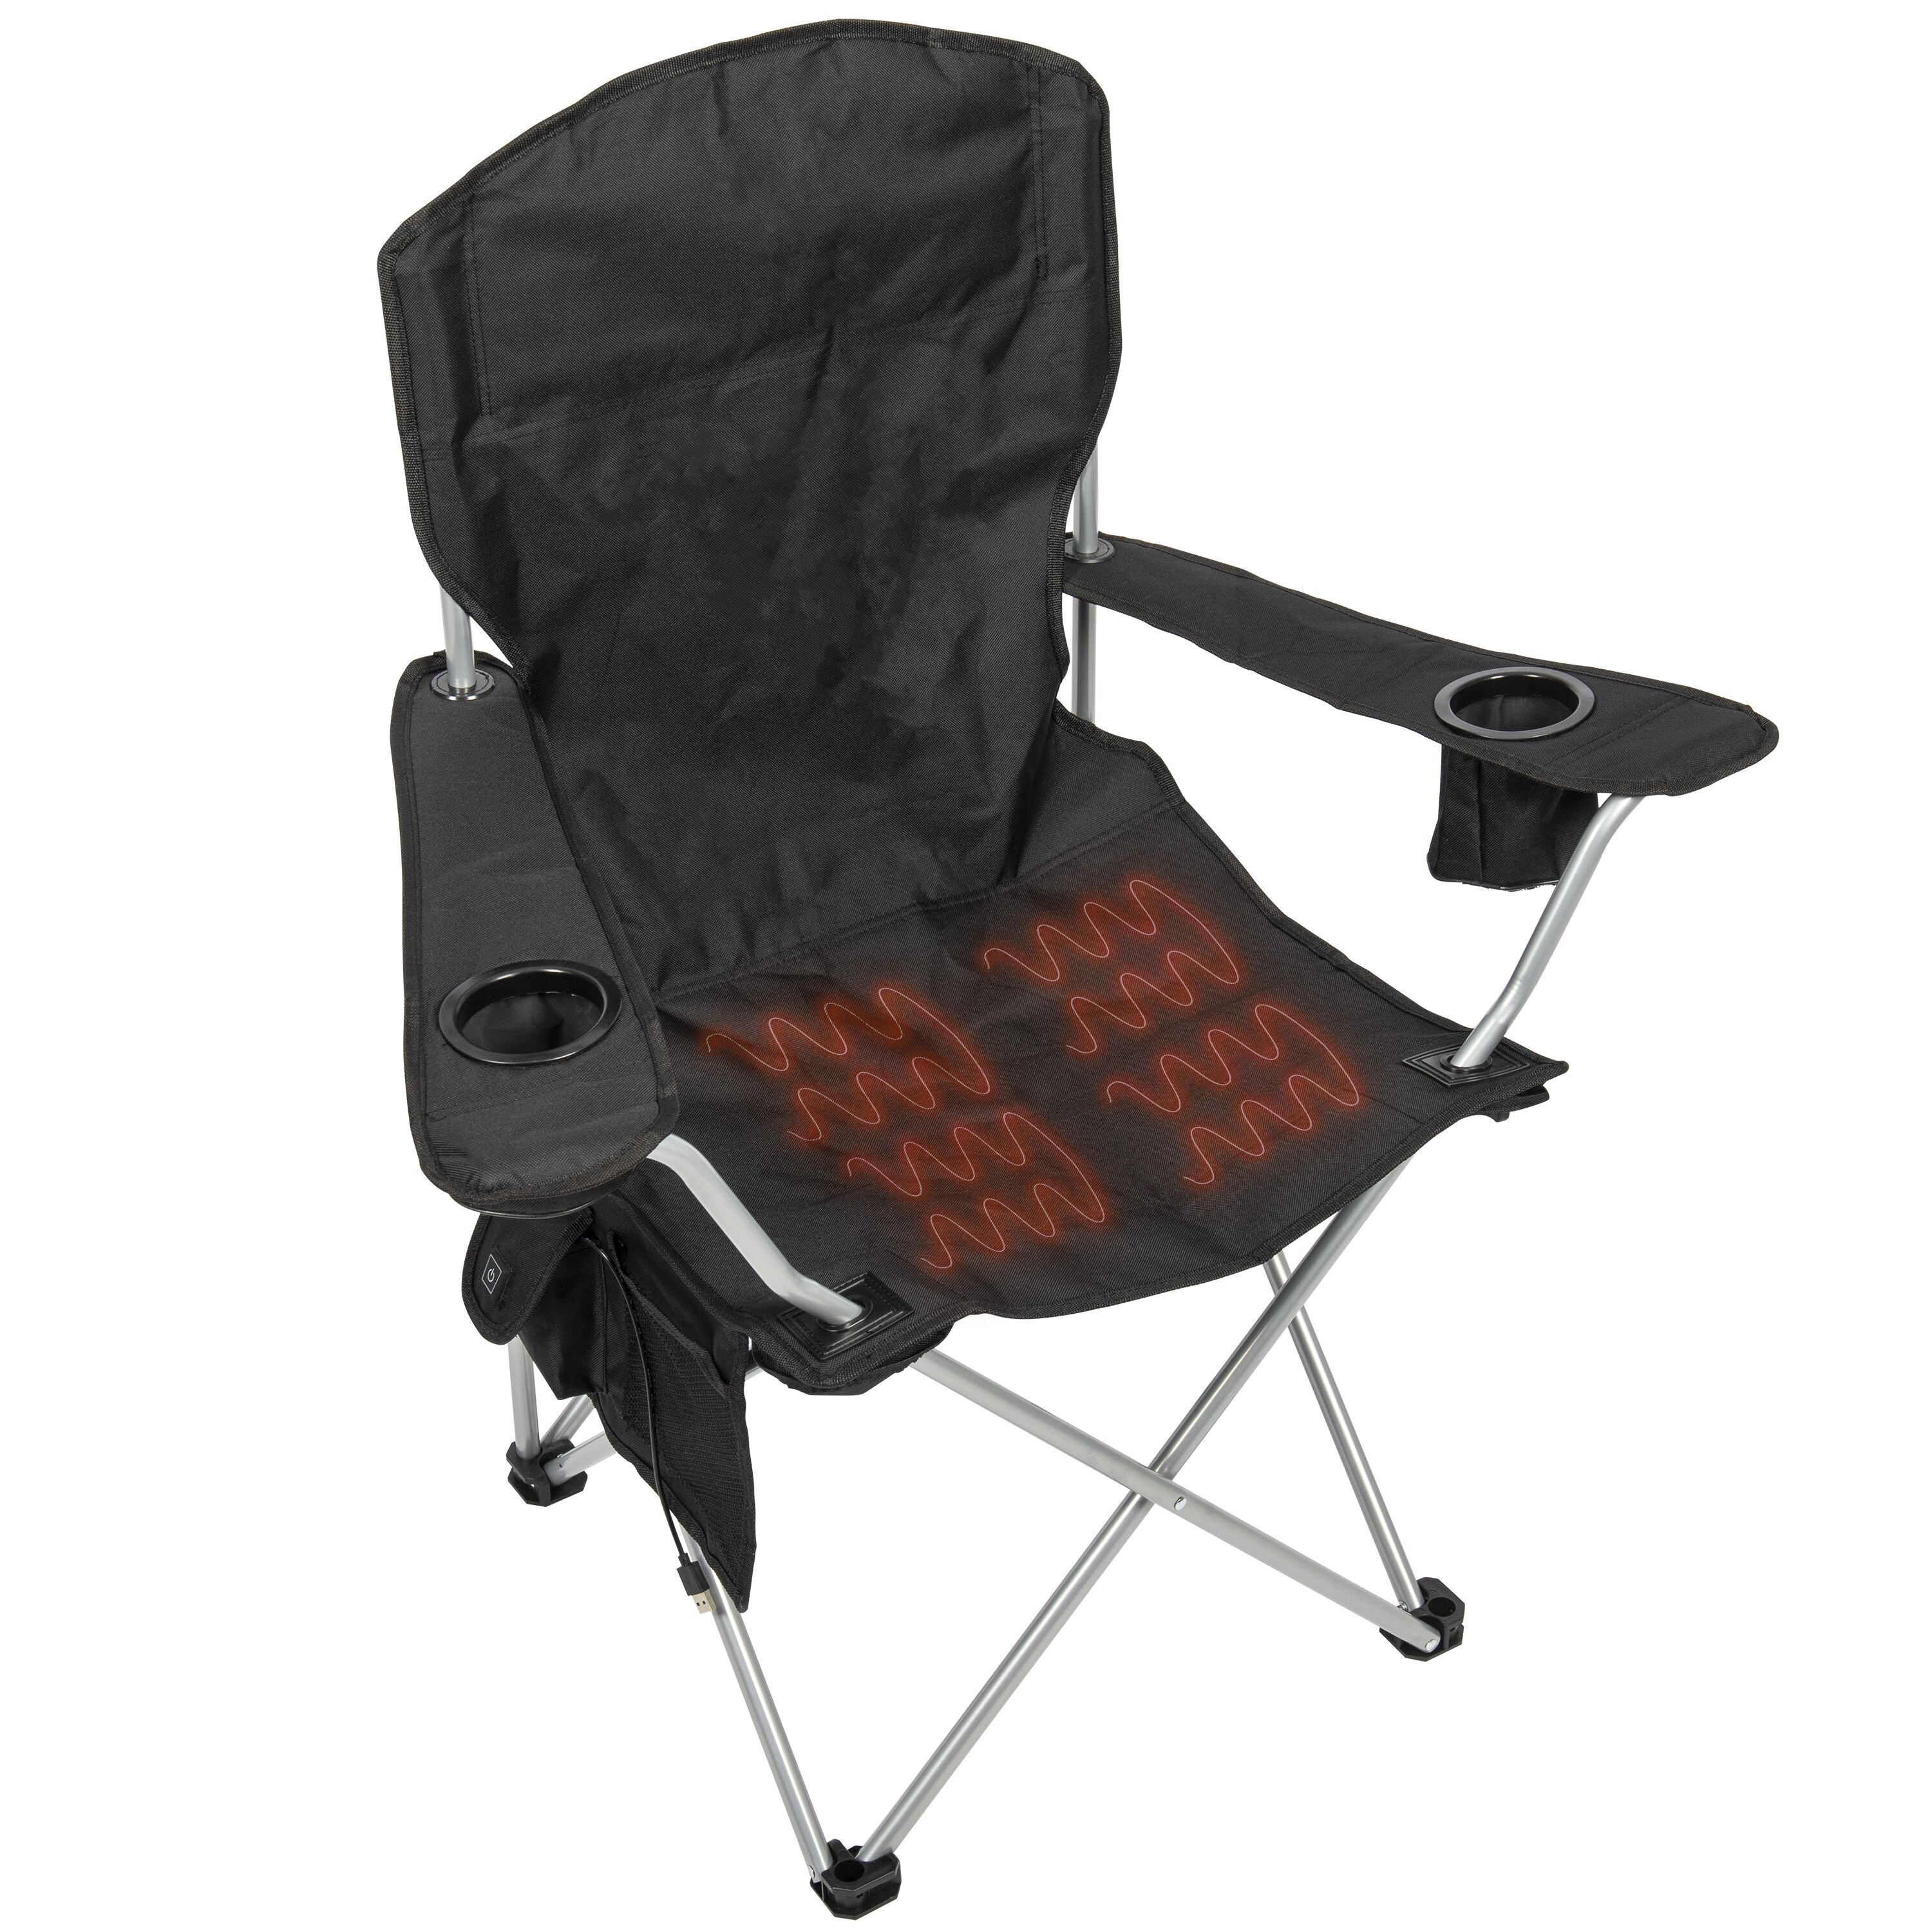 STANSPORT - Go Anywhere Multi-fold Comfy Padded Floor Chair